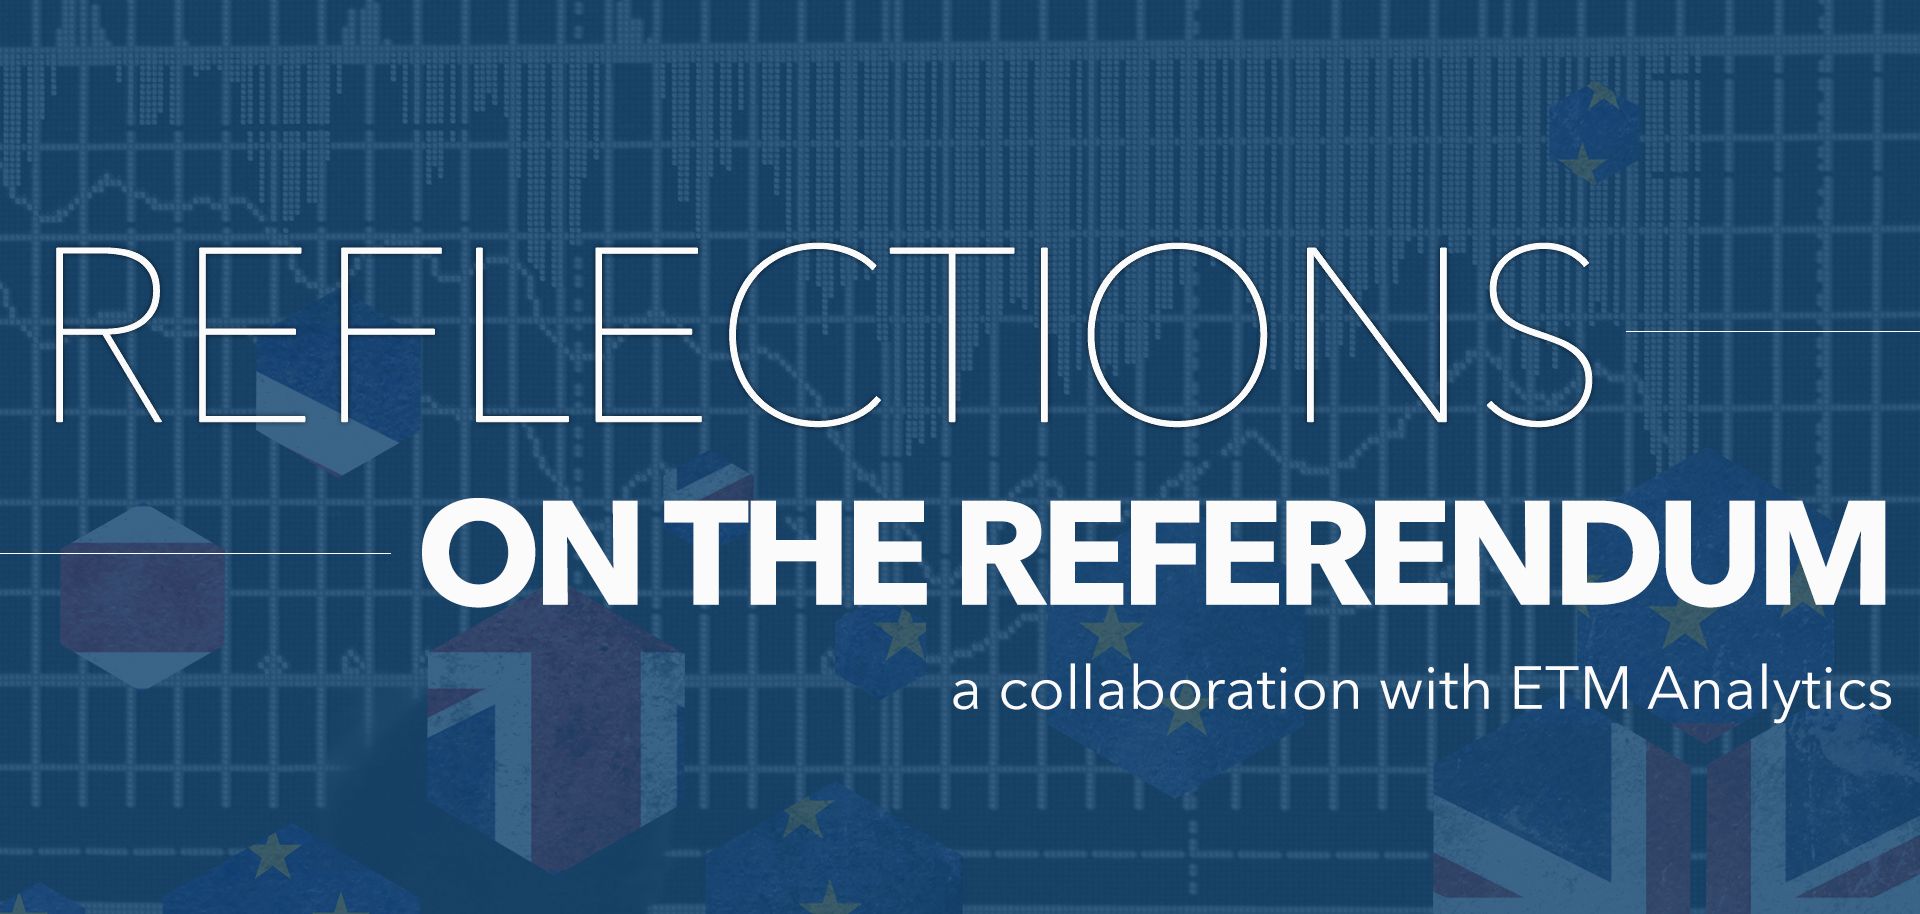 Reflections on the Referendum